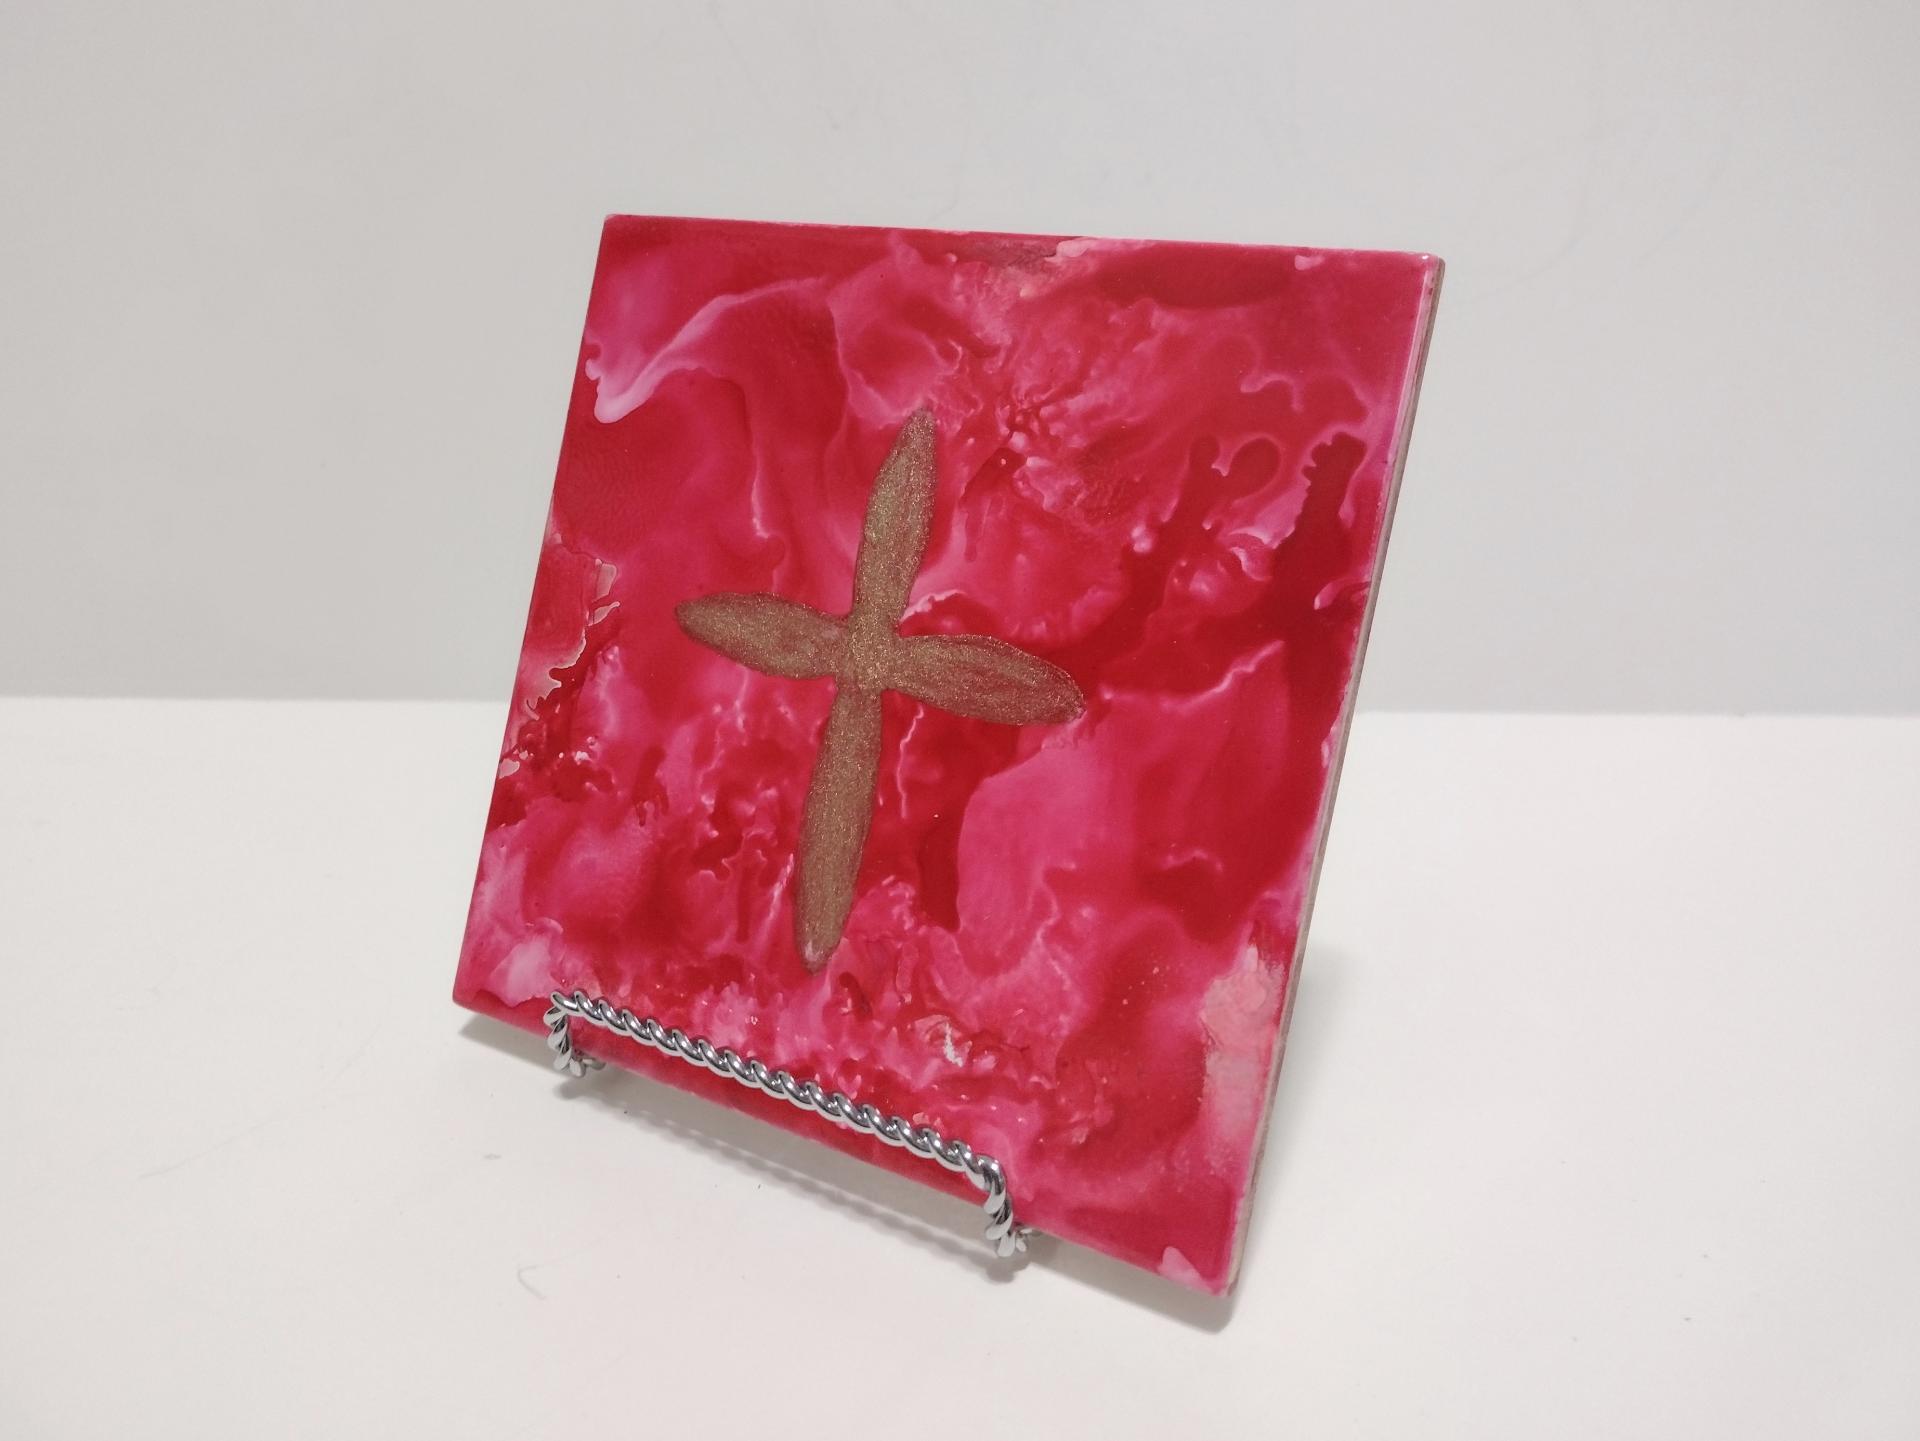 Alcohol Ink Ceramic Tile Trivet, 6" x 6", Red with Gold Metallic Cross